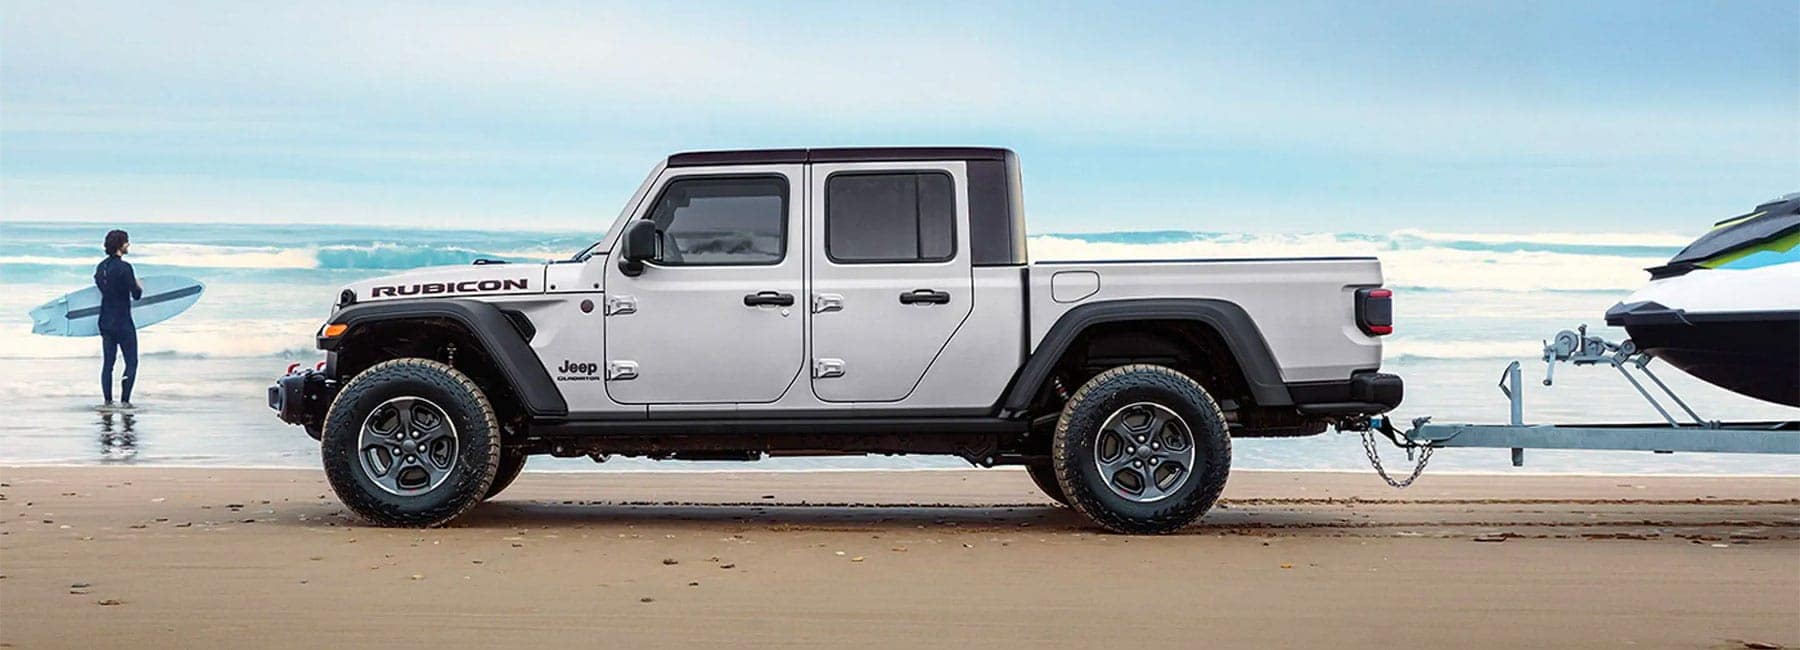 Jeep Gladiator Parked by ocean